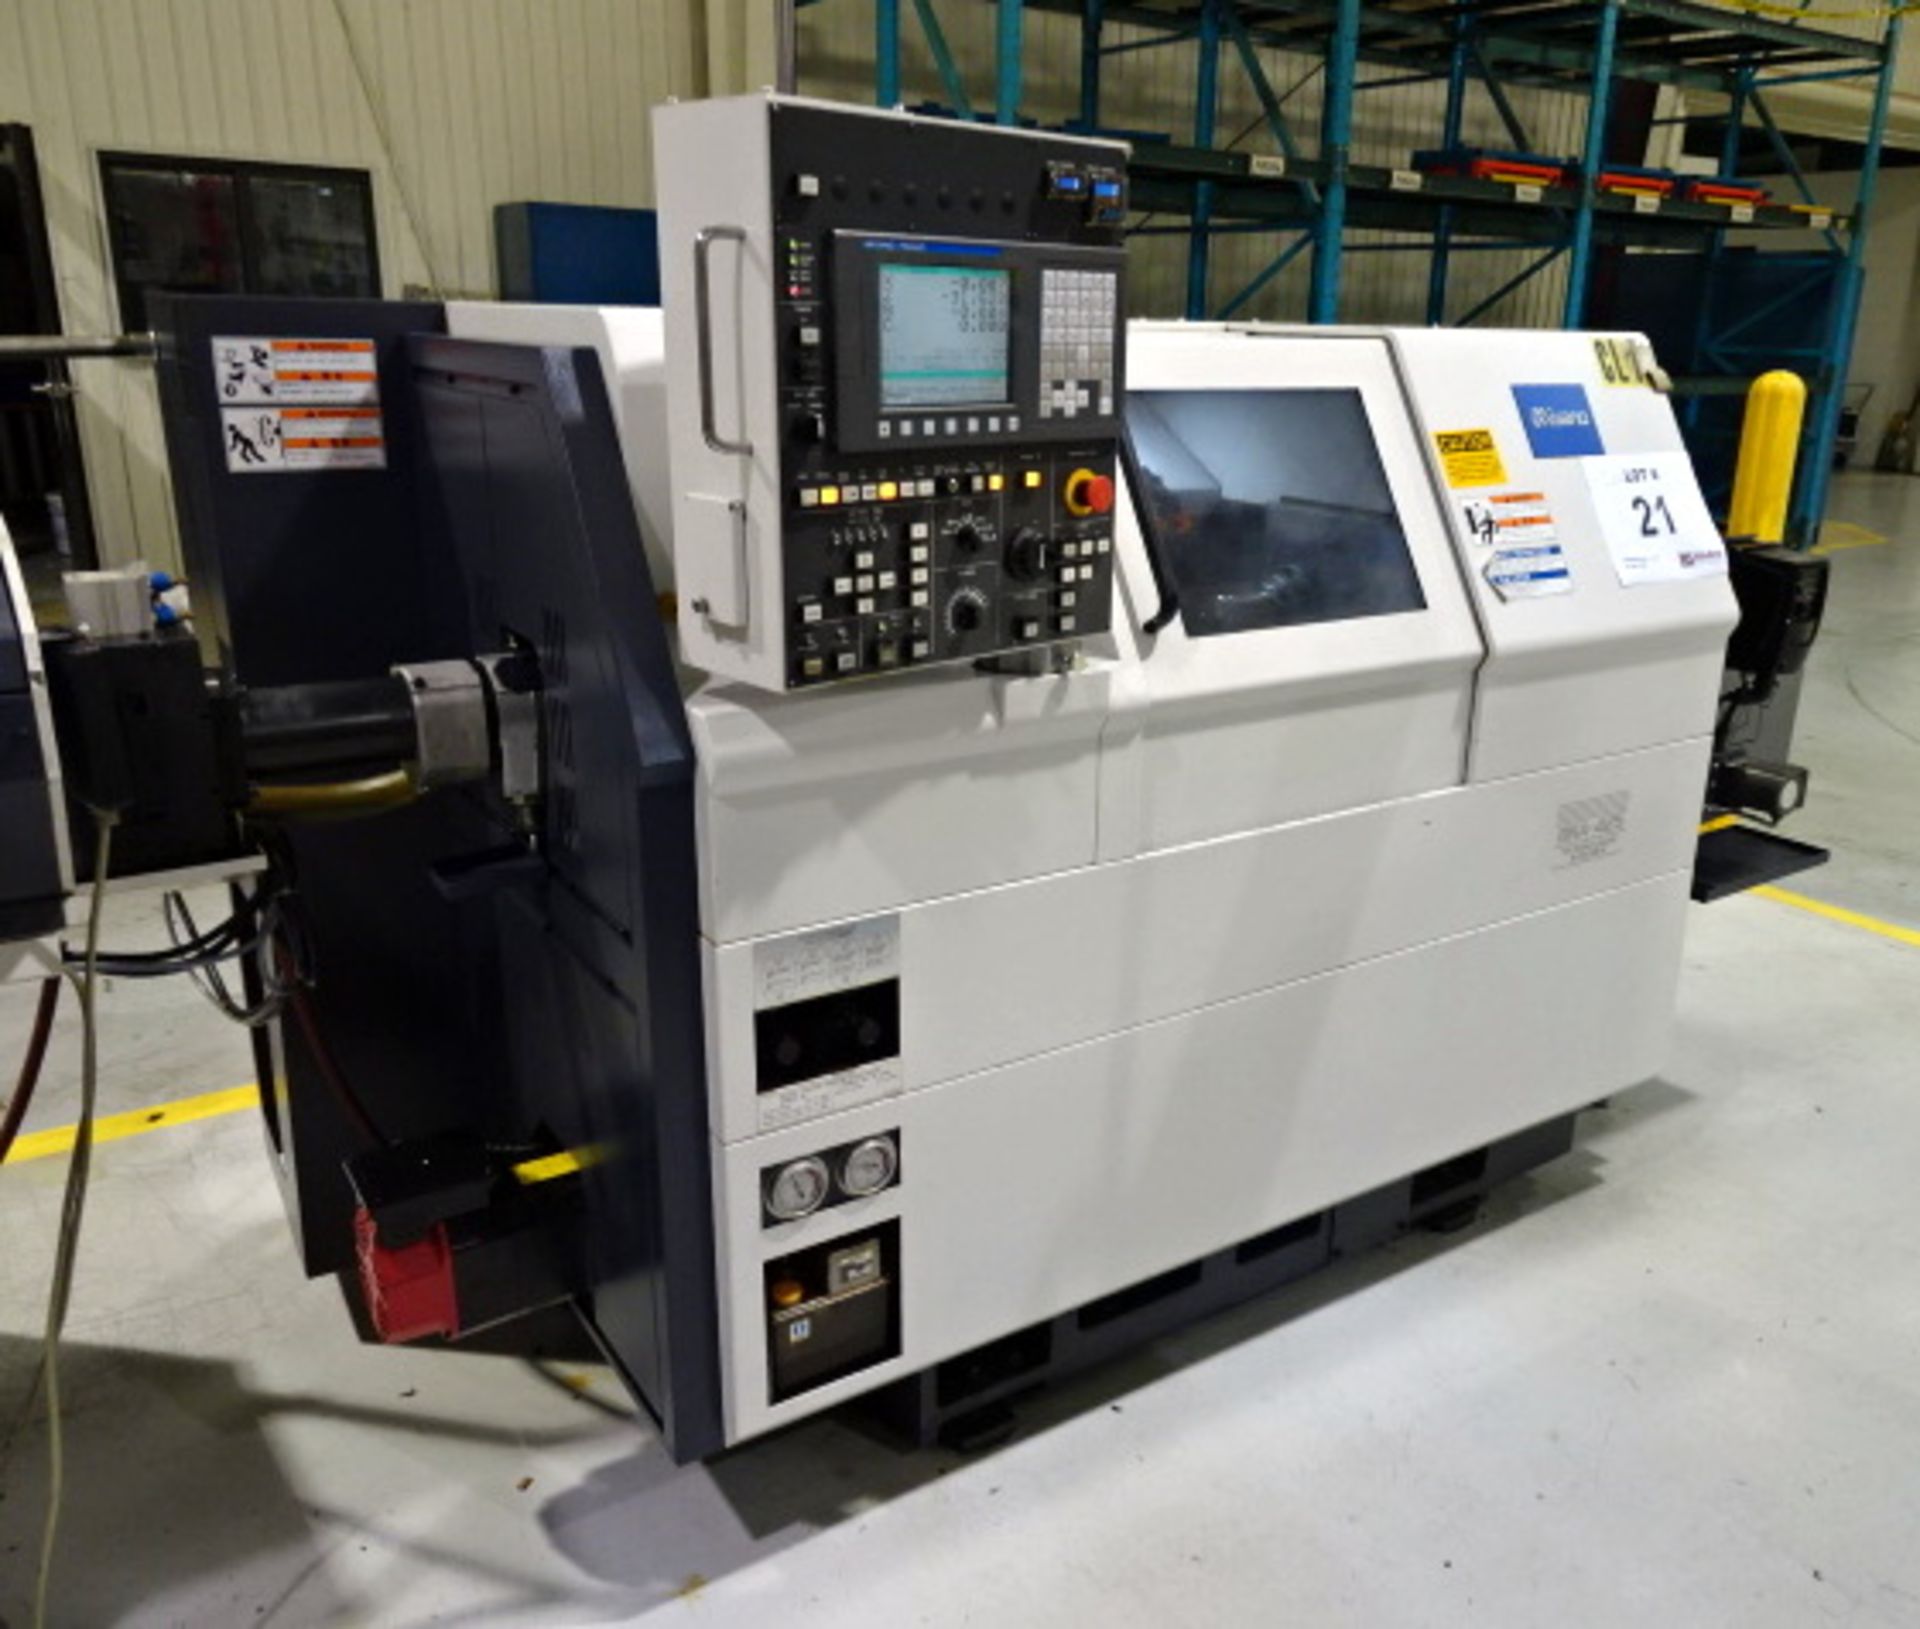 2010 Miyano Model BNA-42S 42mm/1.65" Cap. CNC Turning Center; Spindle: Drive 10-HP; Speeds to 5,